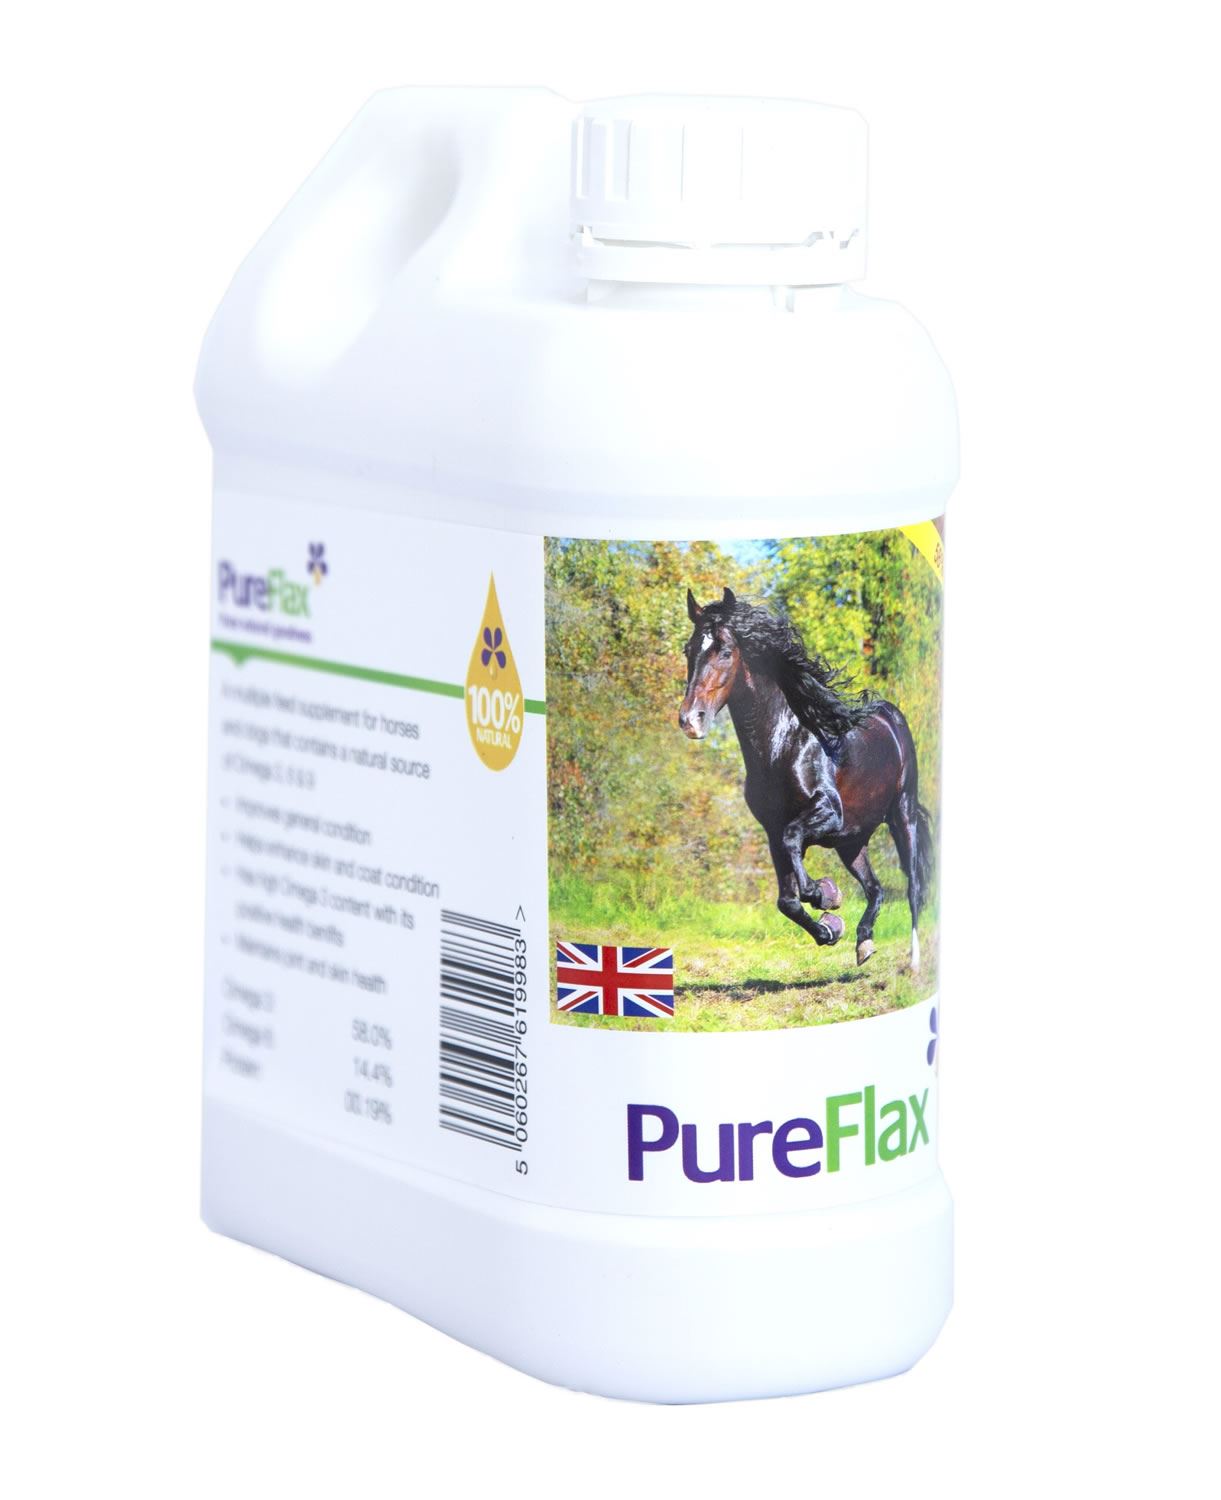 Pureflax For Horses - Just Horse Riders